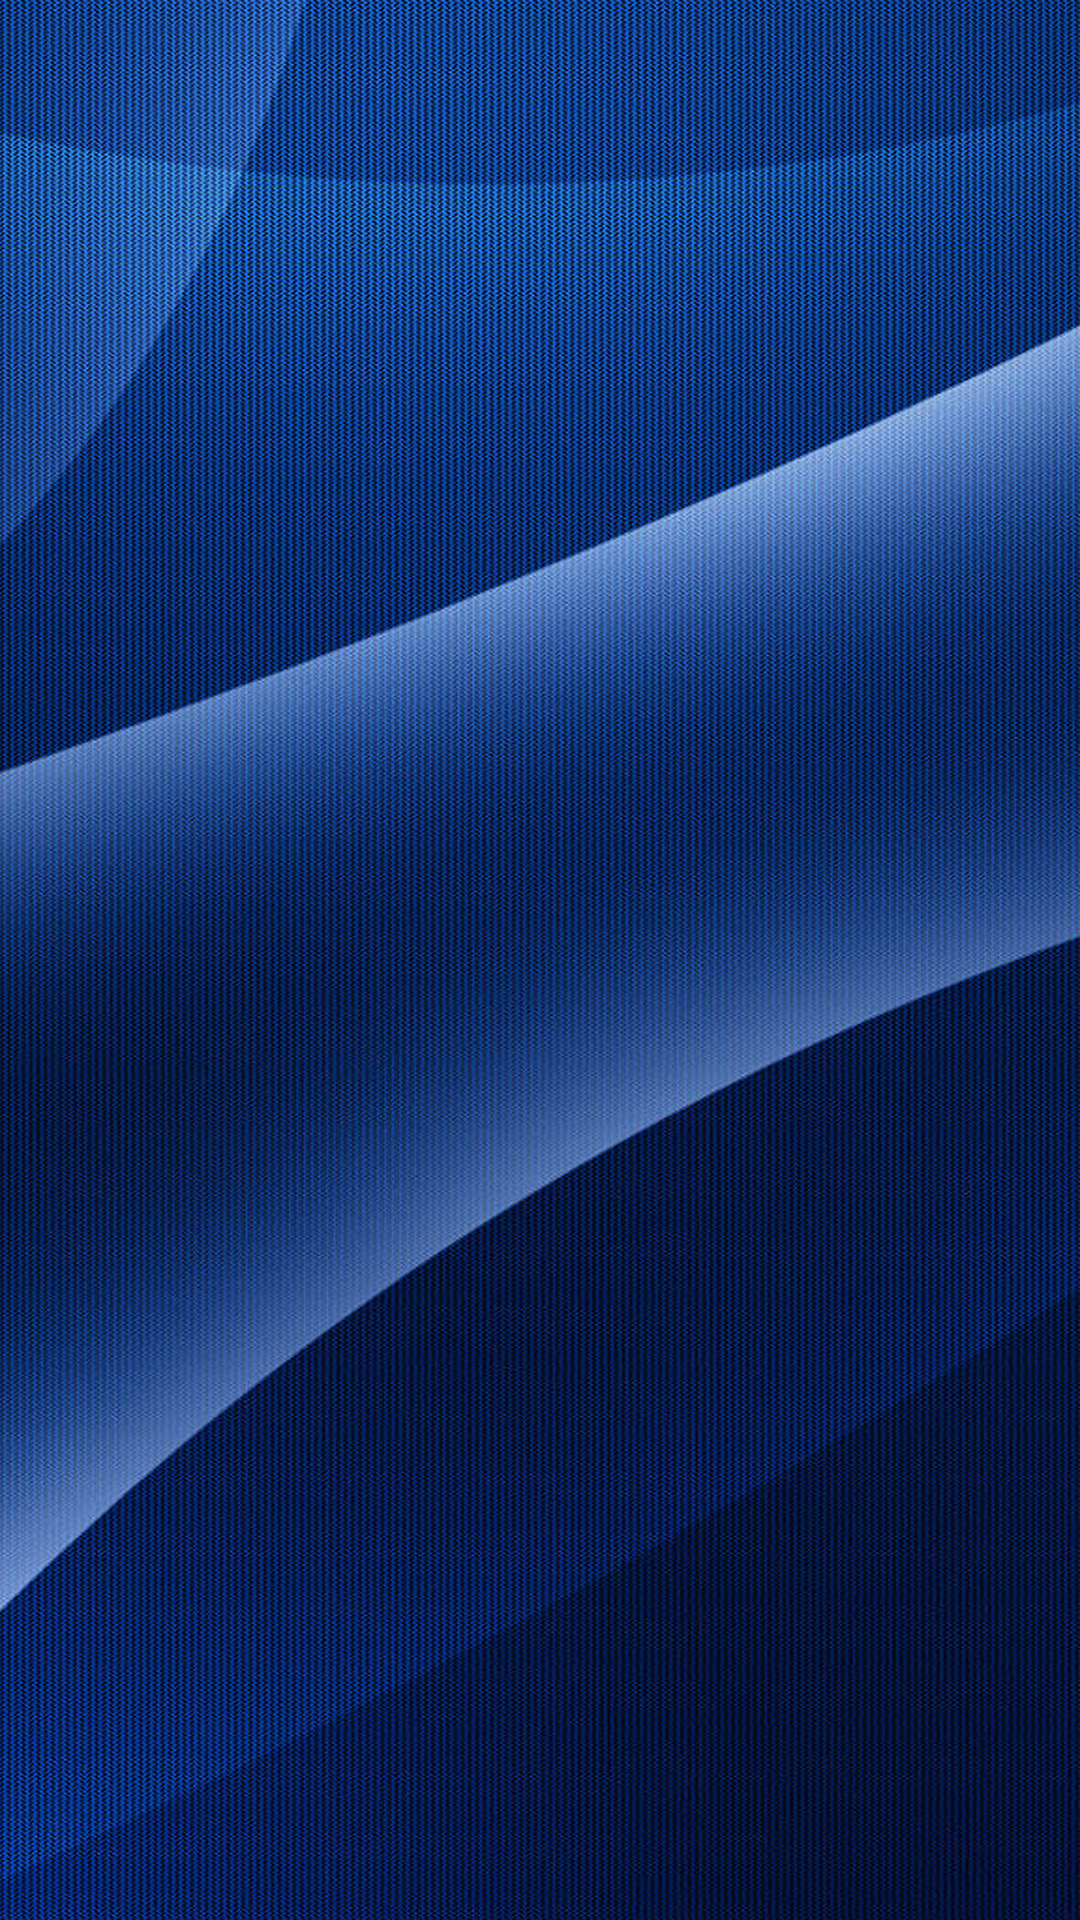  fabric Samsung Galaxy S5 Wallpapers Samsung Galaxy S5 Wallpapers